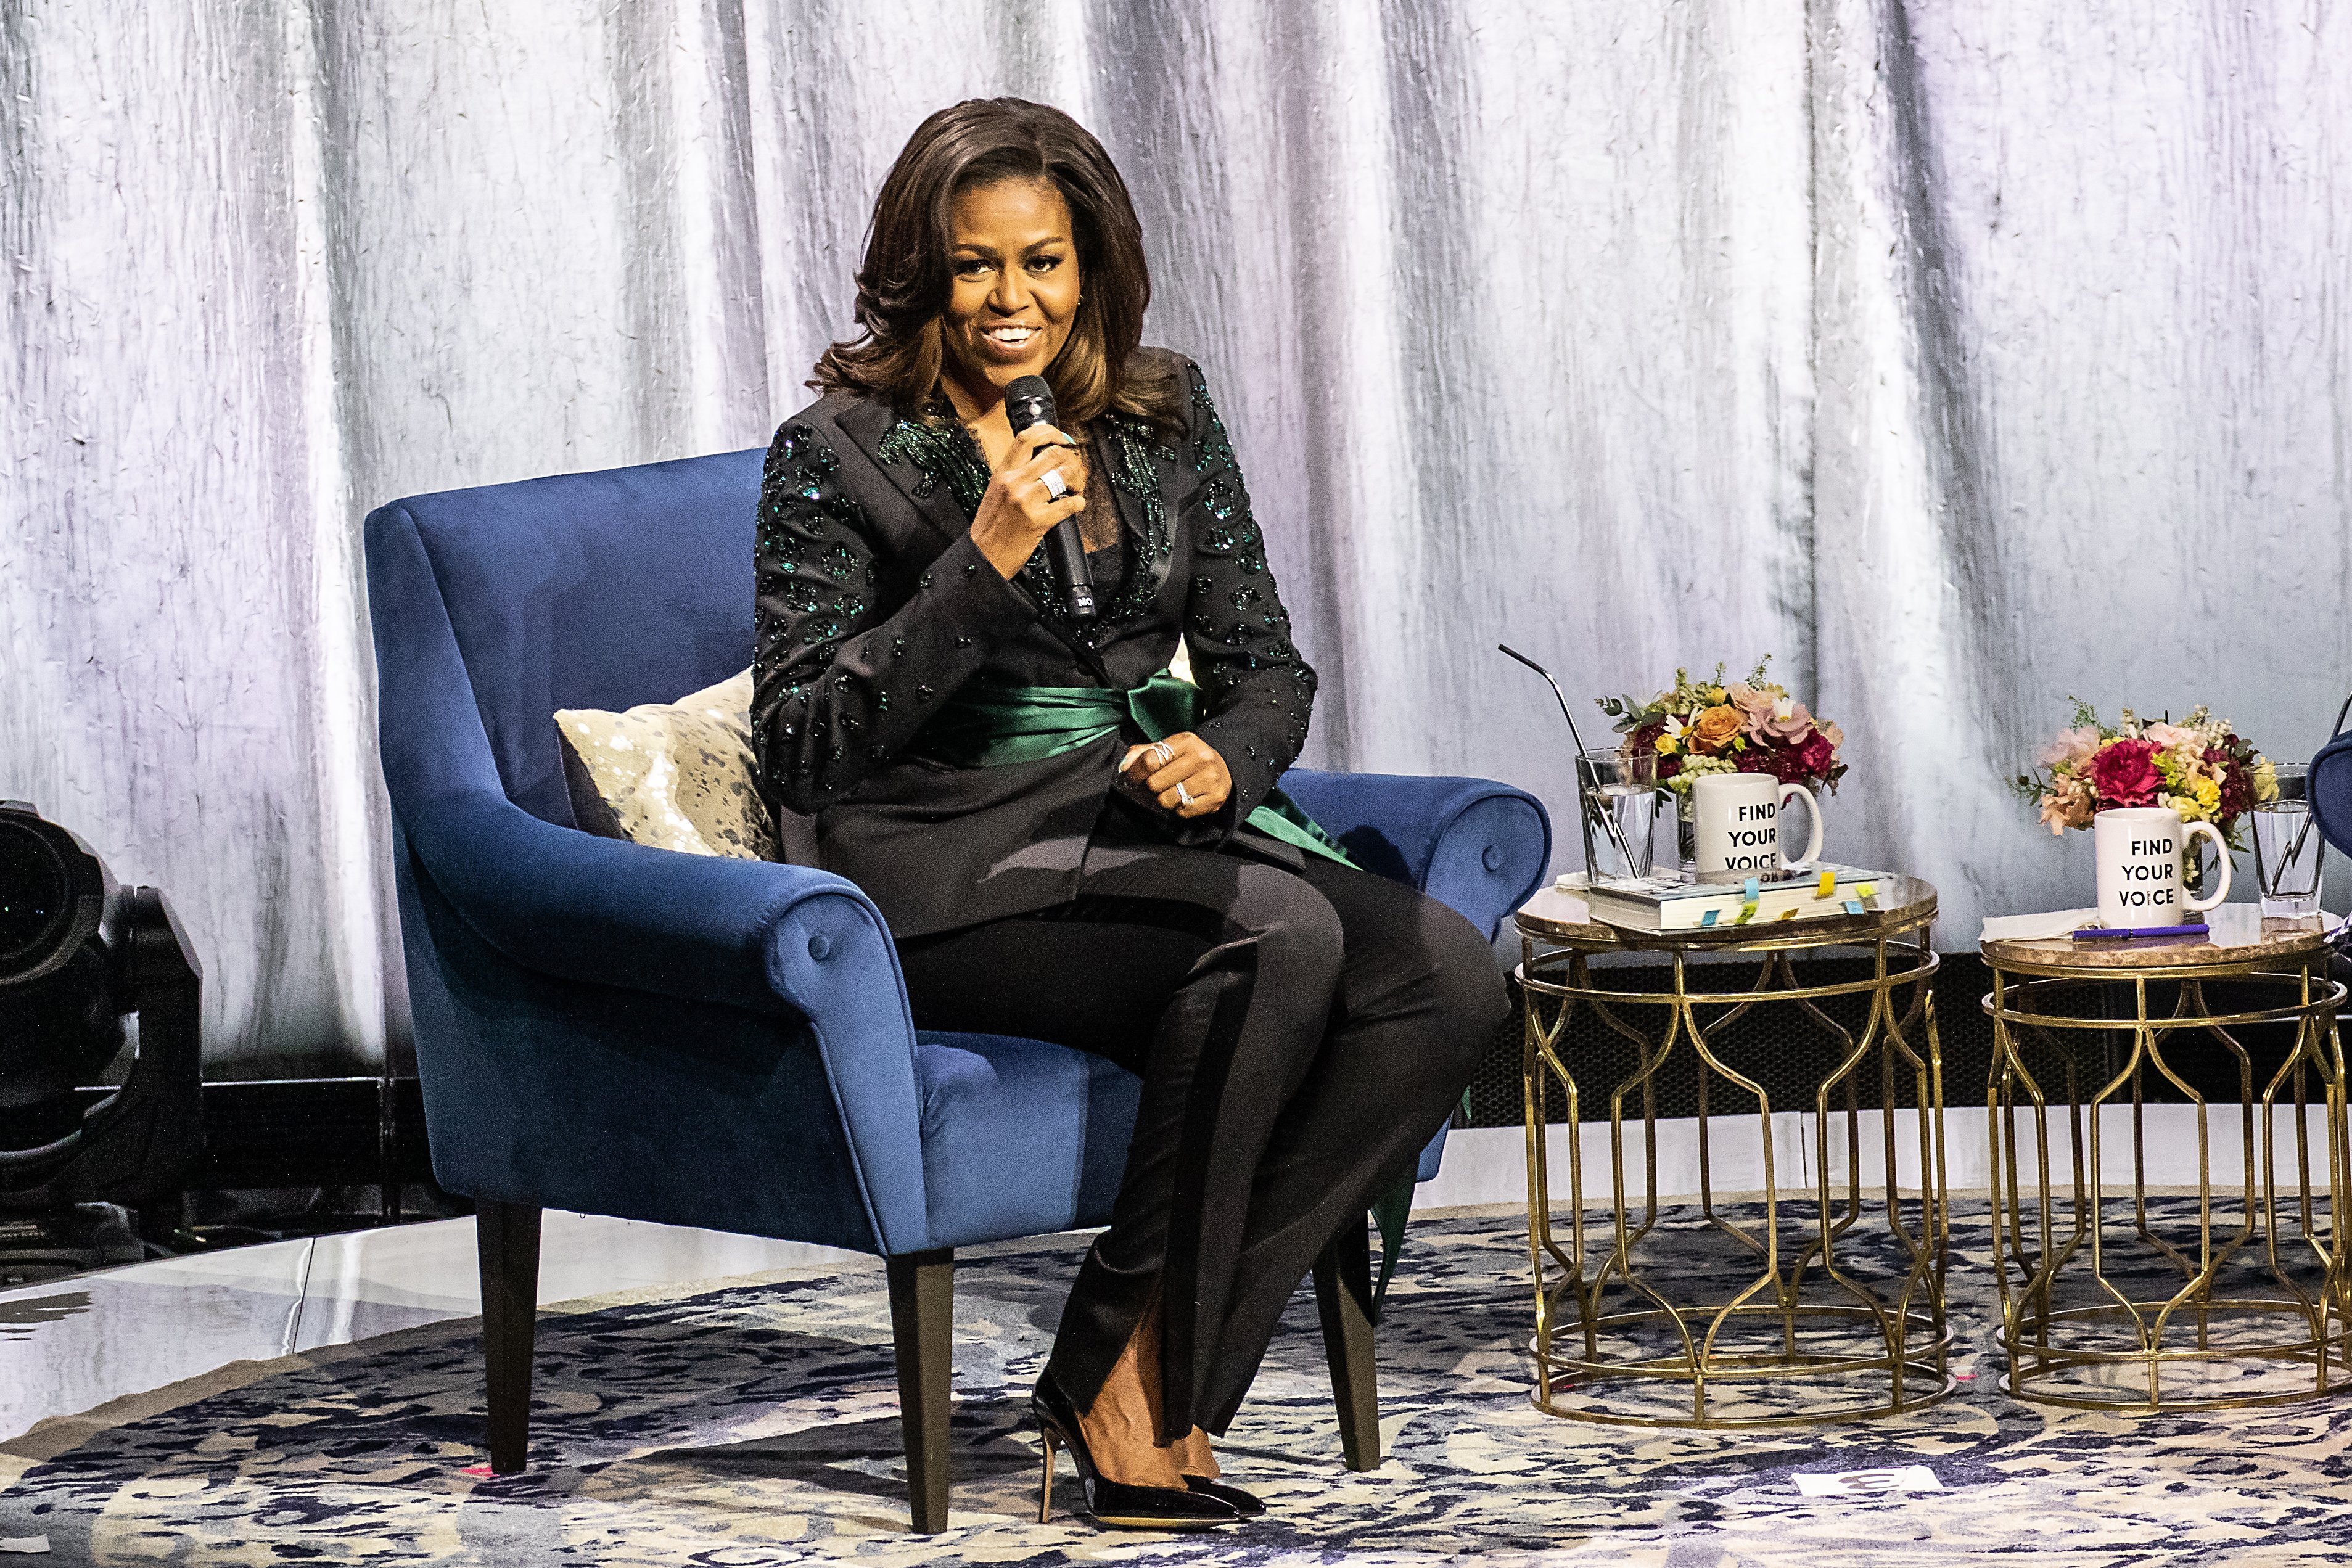 Michelle Obama during the Oslo, Norway leg of her "Becoming" book tour in April 2019. | Photo: Getty Images